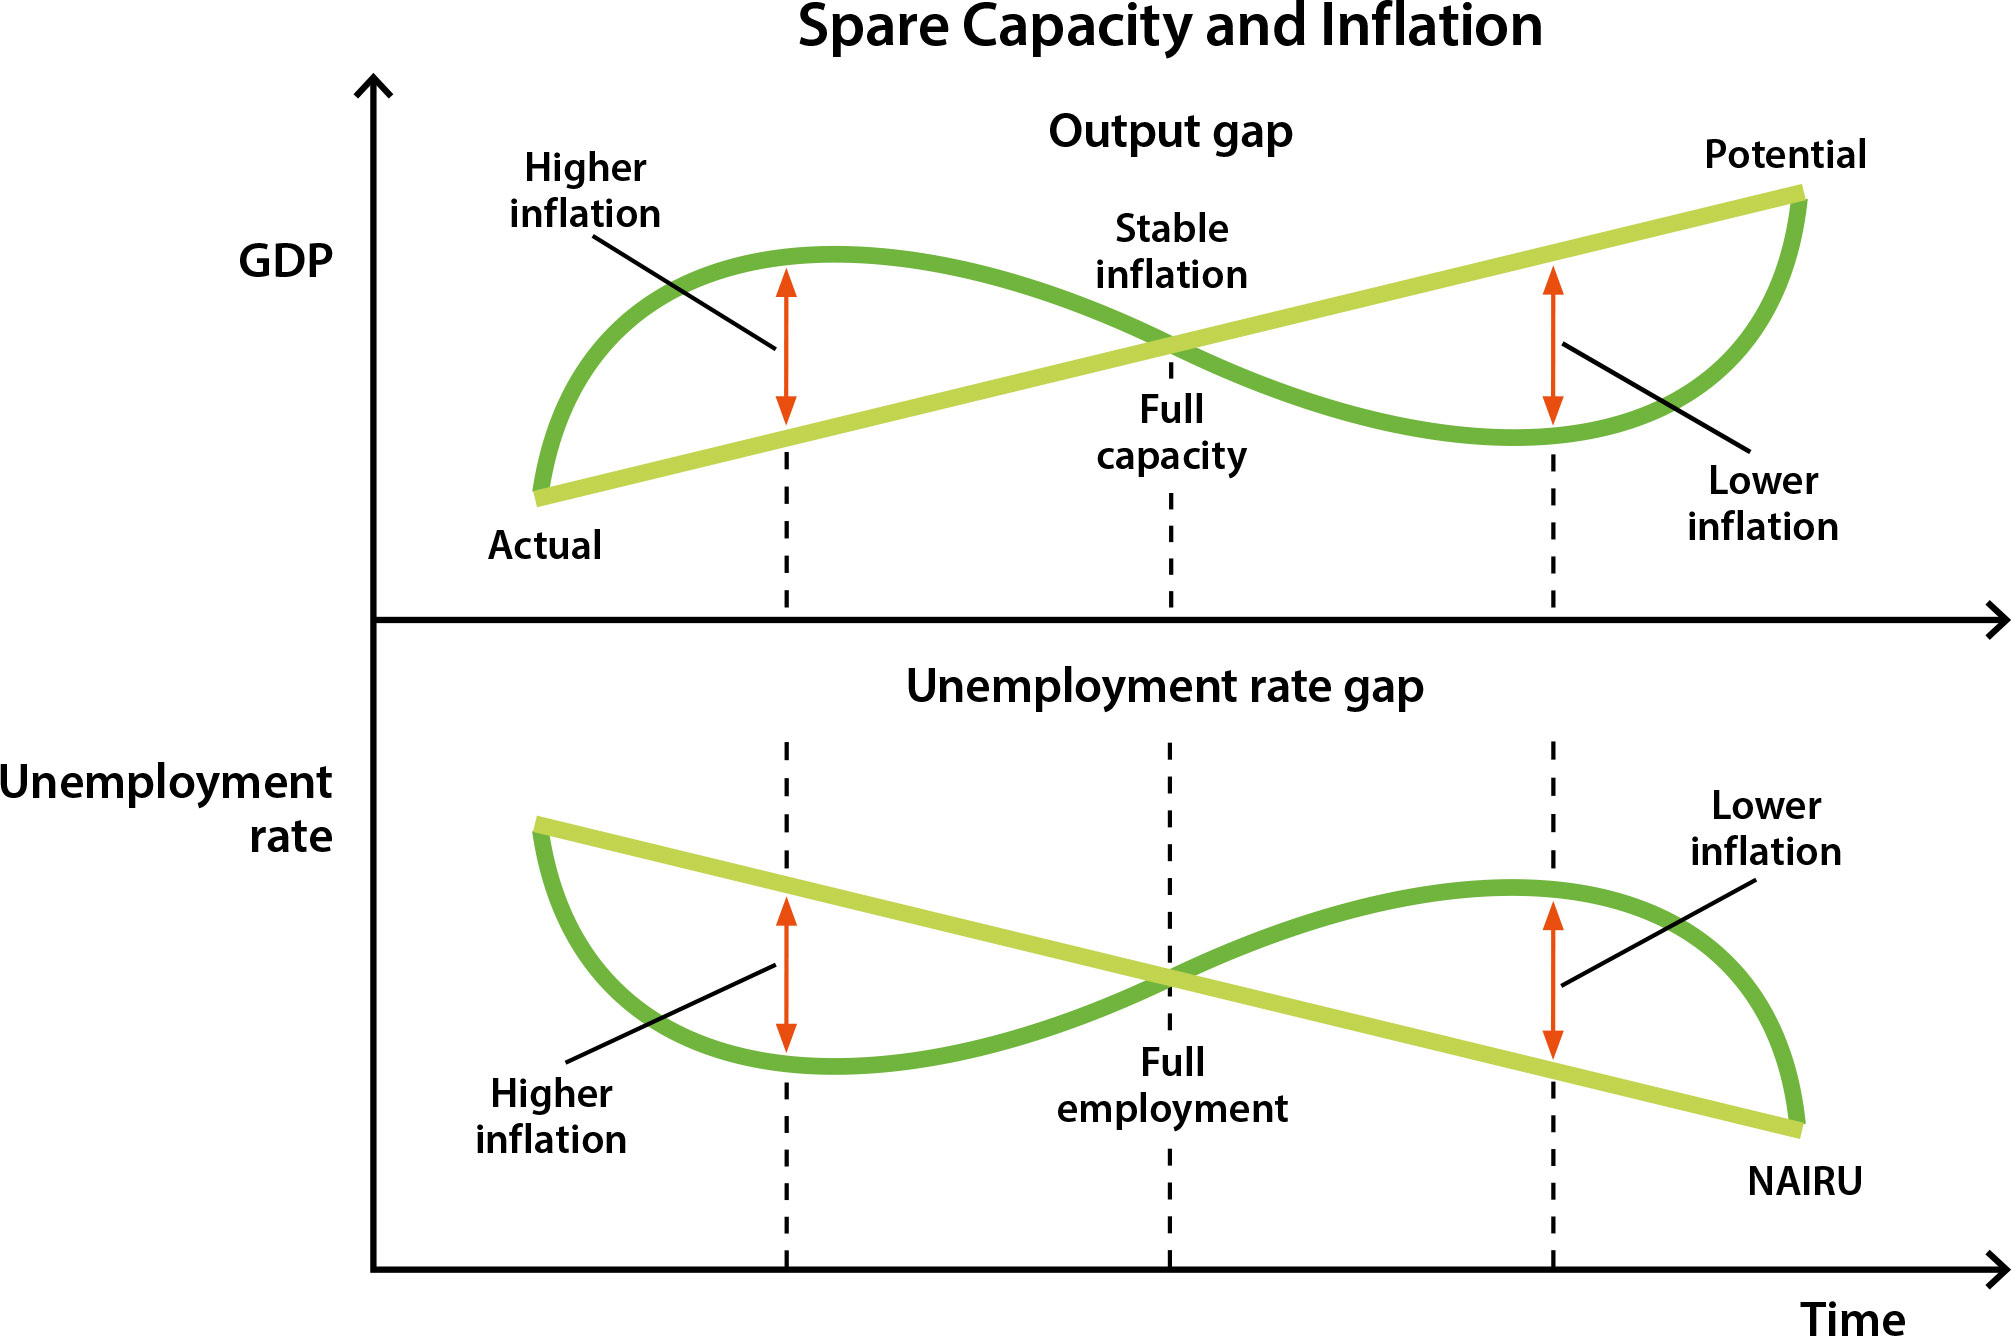 Image showing an example of spare capacity and inflation. When there is a positive output gap (actual output is
										  greater than potential output) and the unemployment rate is below the non-accelerating
										  inflation rate of unemployment (or NAIRU), there will be a higher rate of inflation and vice versa.